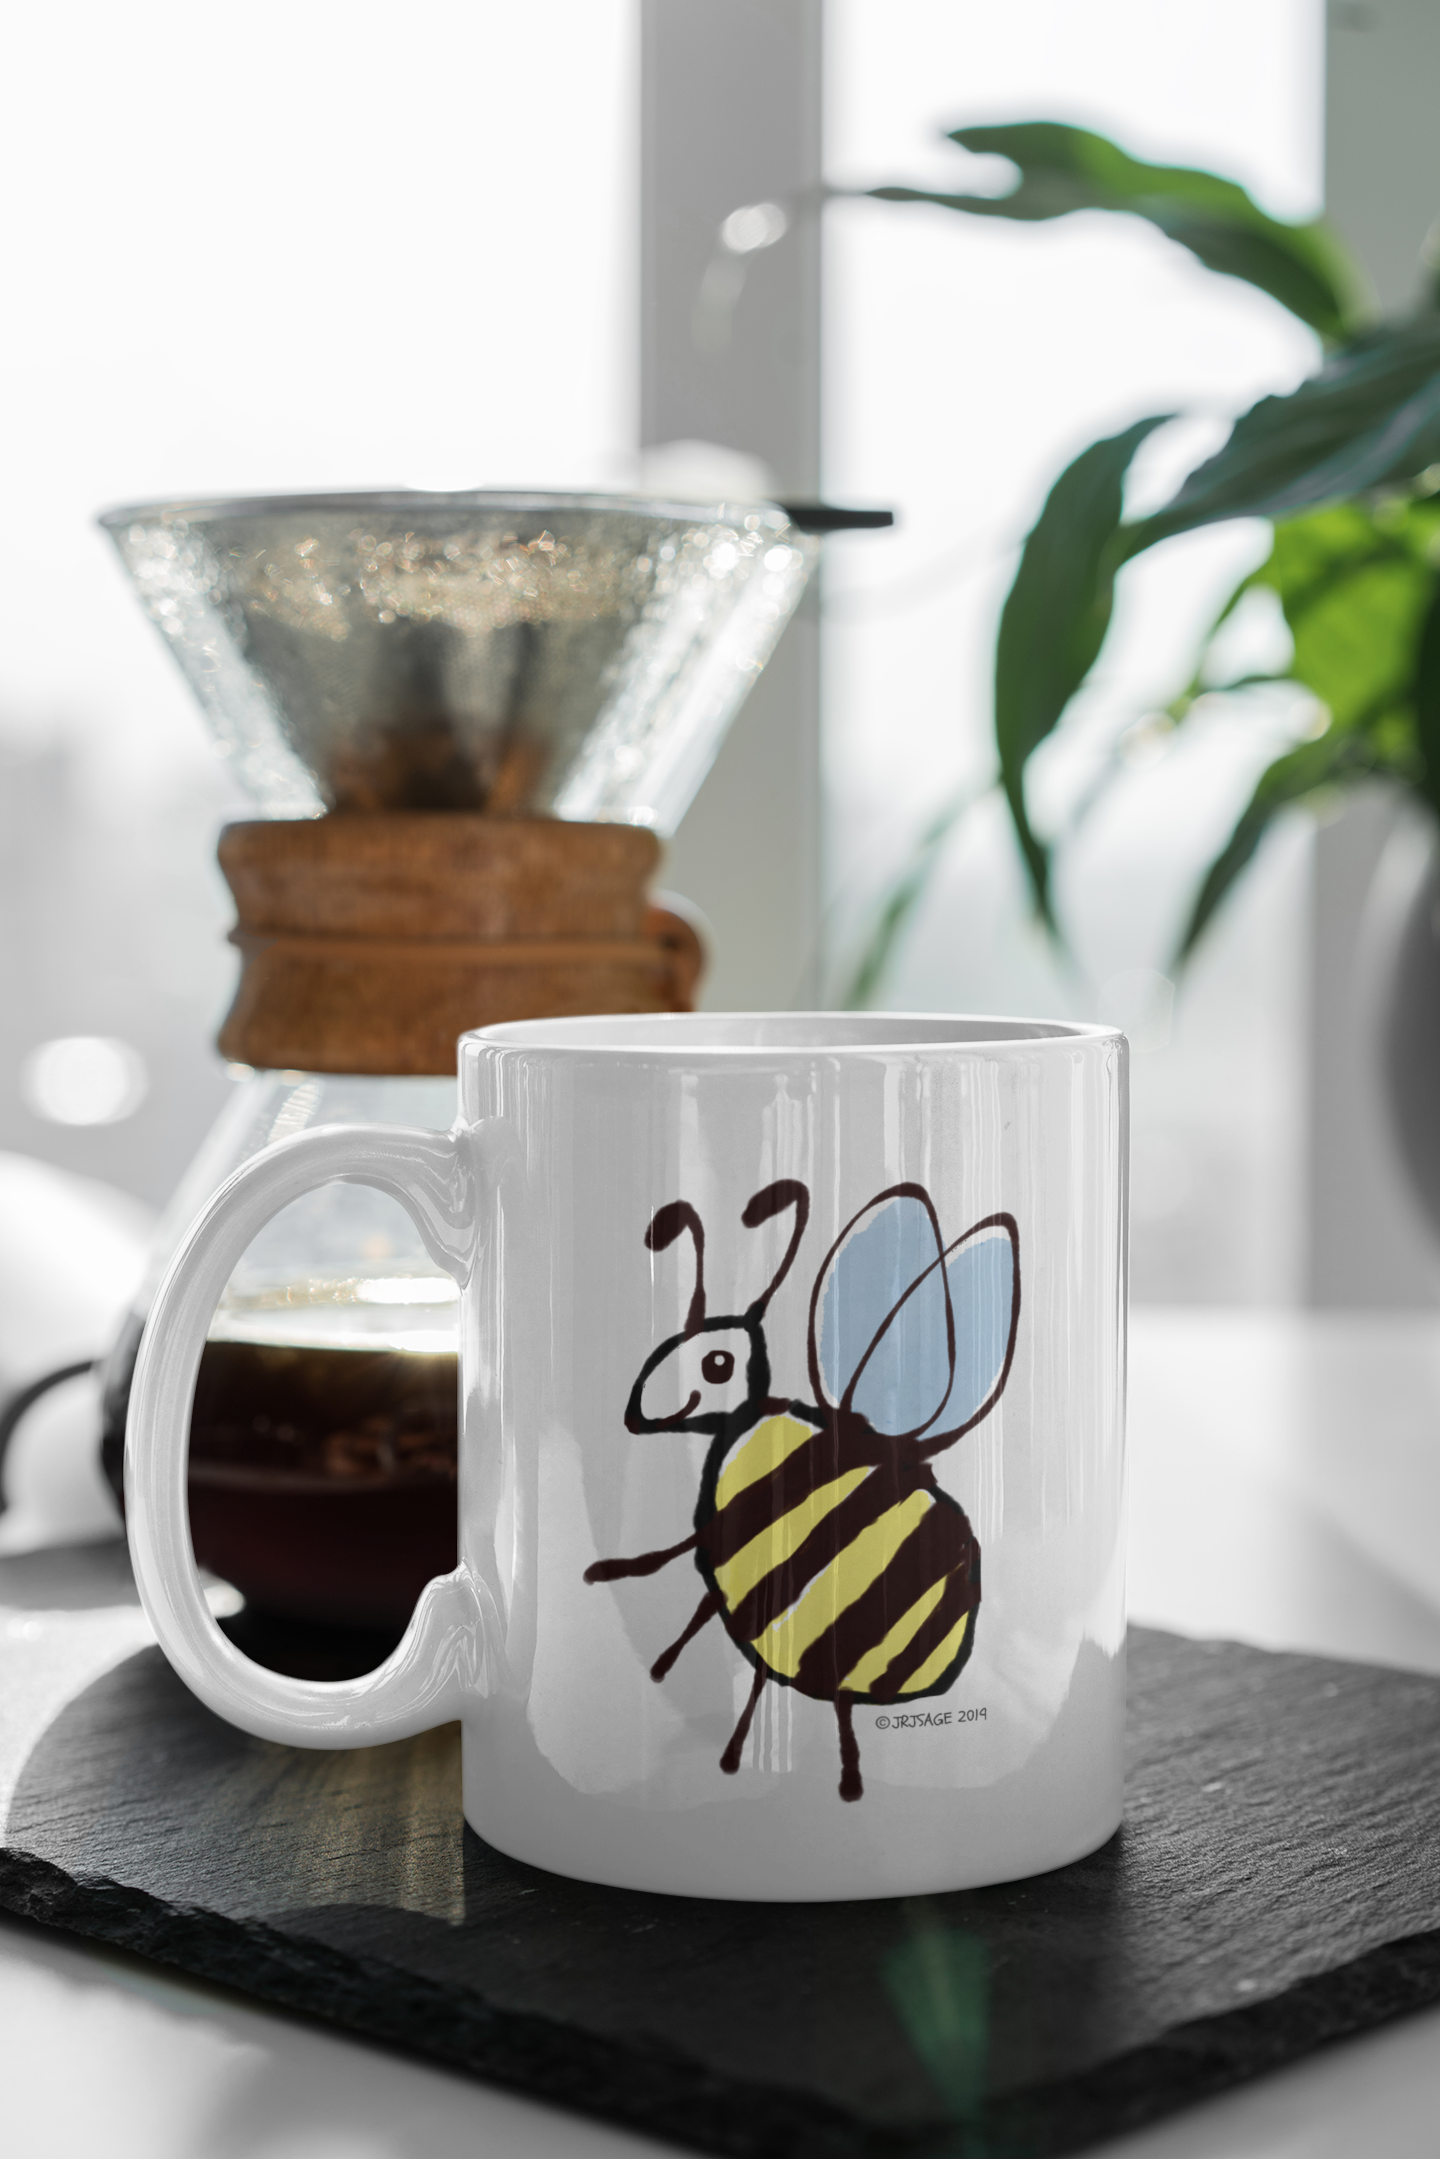 Cute Busy Bee design on a coffee mug by Hector and Bone on a table